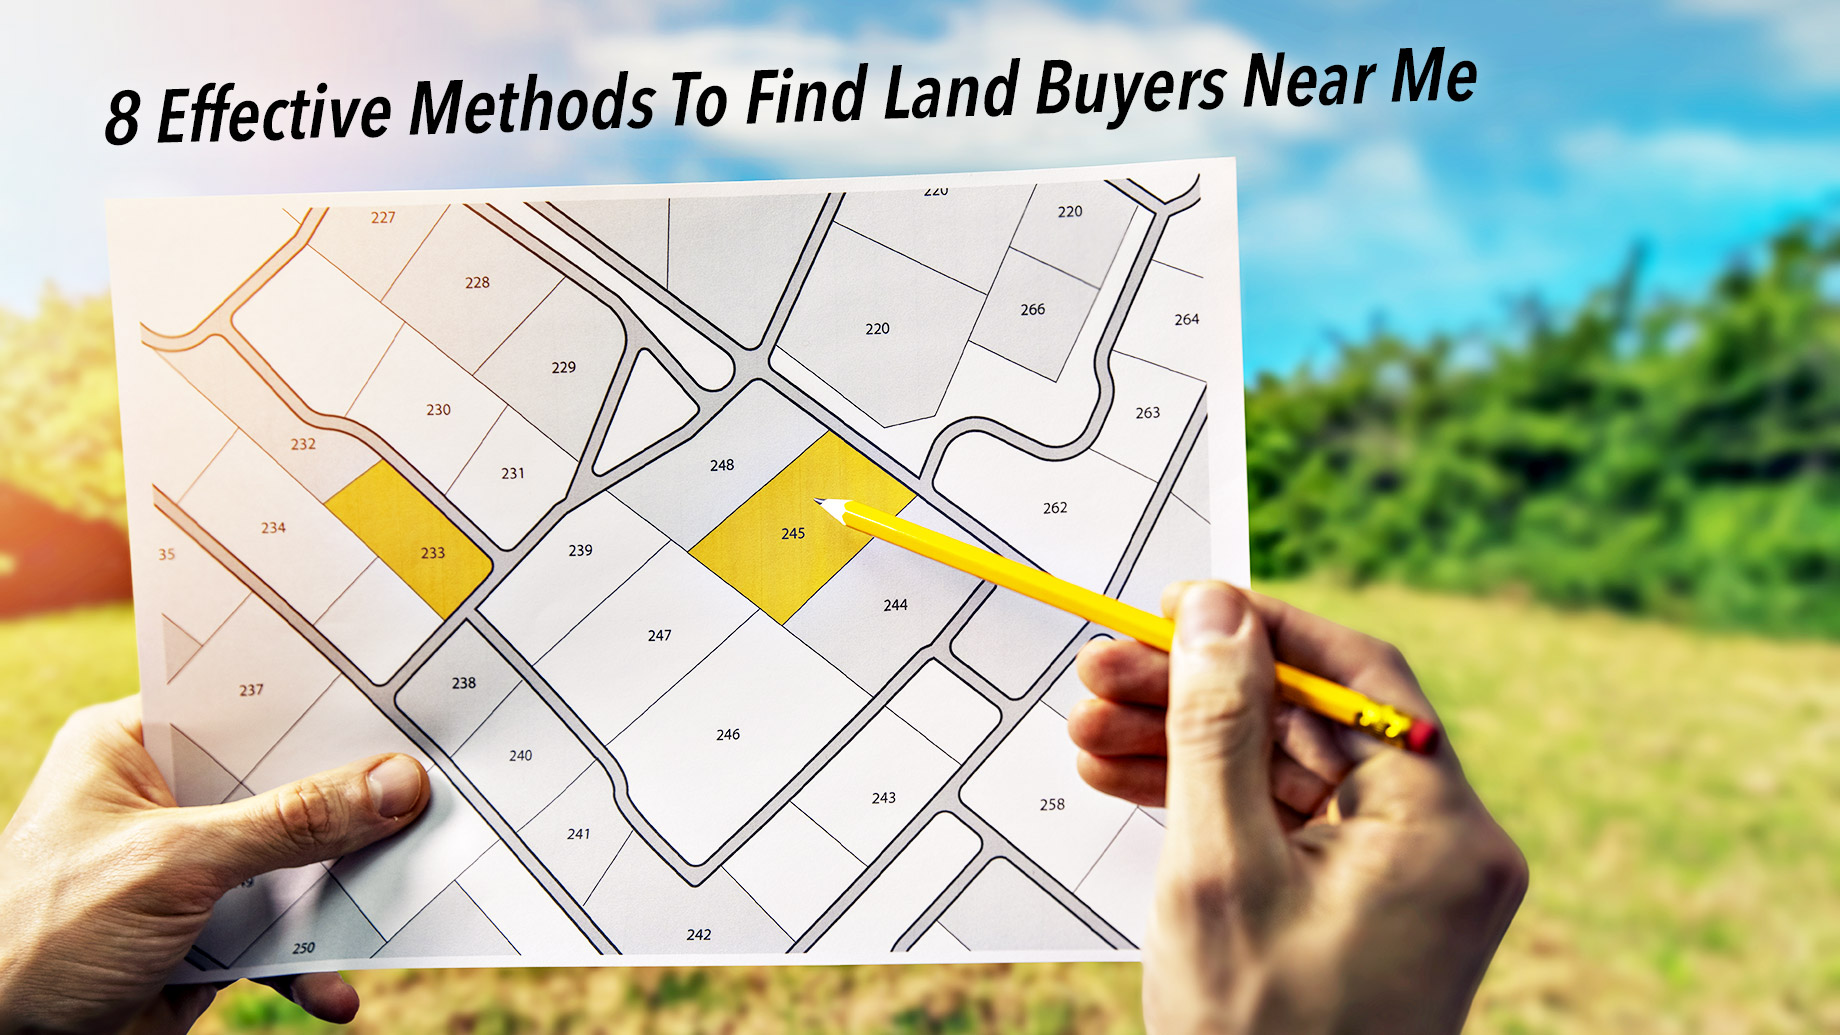 8 Effective Methods To Find Land Buyers Near Me